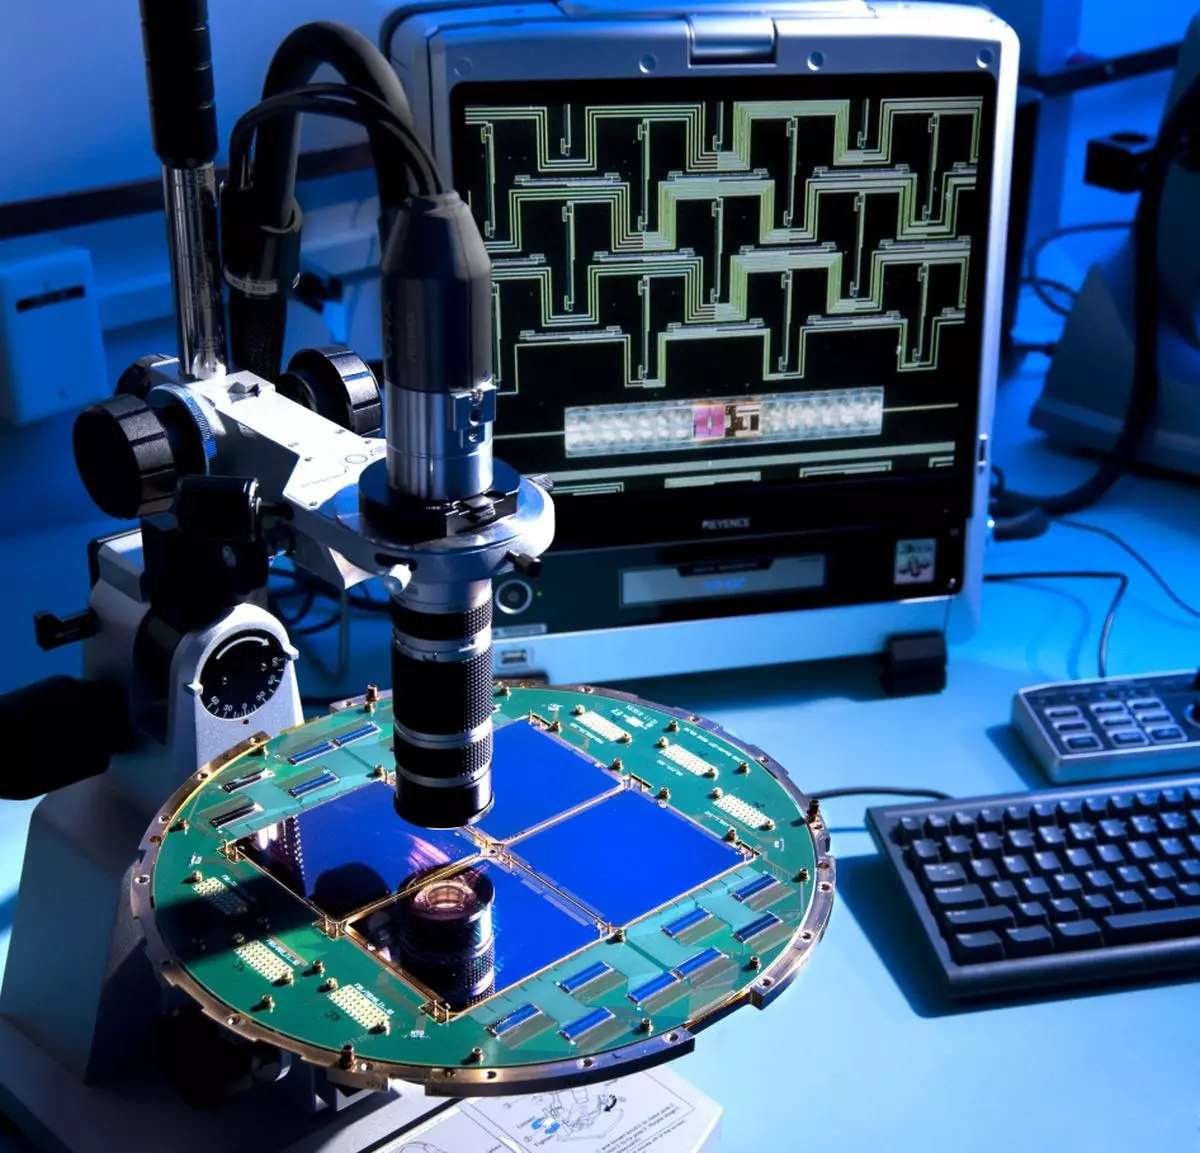 The BICEP2 telescope at the South Pole used a specialized array of superconducting detectors to capture polarized light from billions of years ago. The detector array is shown here, under a microscope. Techniques called micro-lithography and micro-machining are used to fabricate the devices. (Image Credit: NASA/JPL-Caltech)